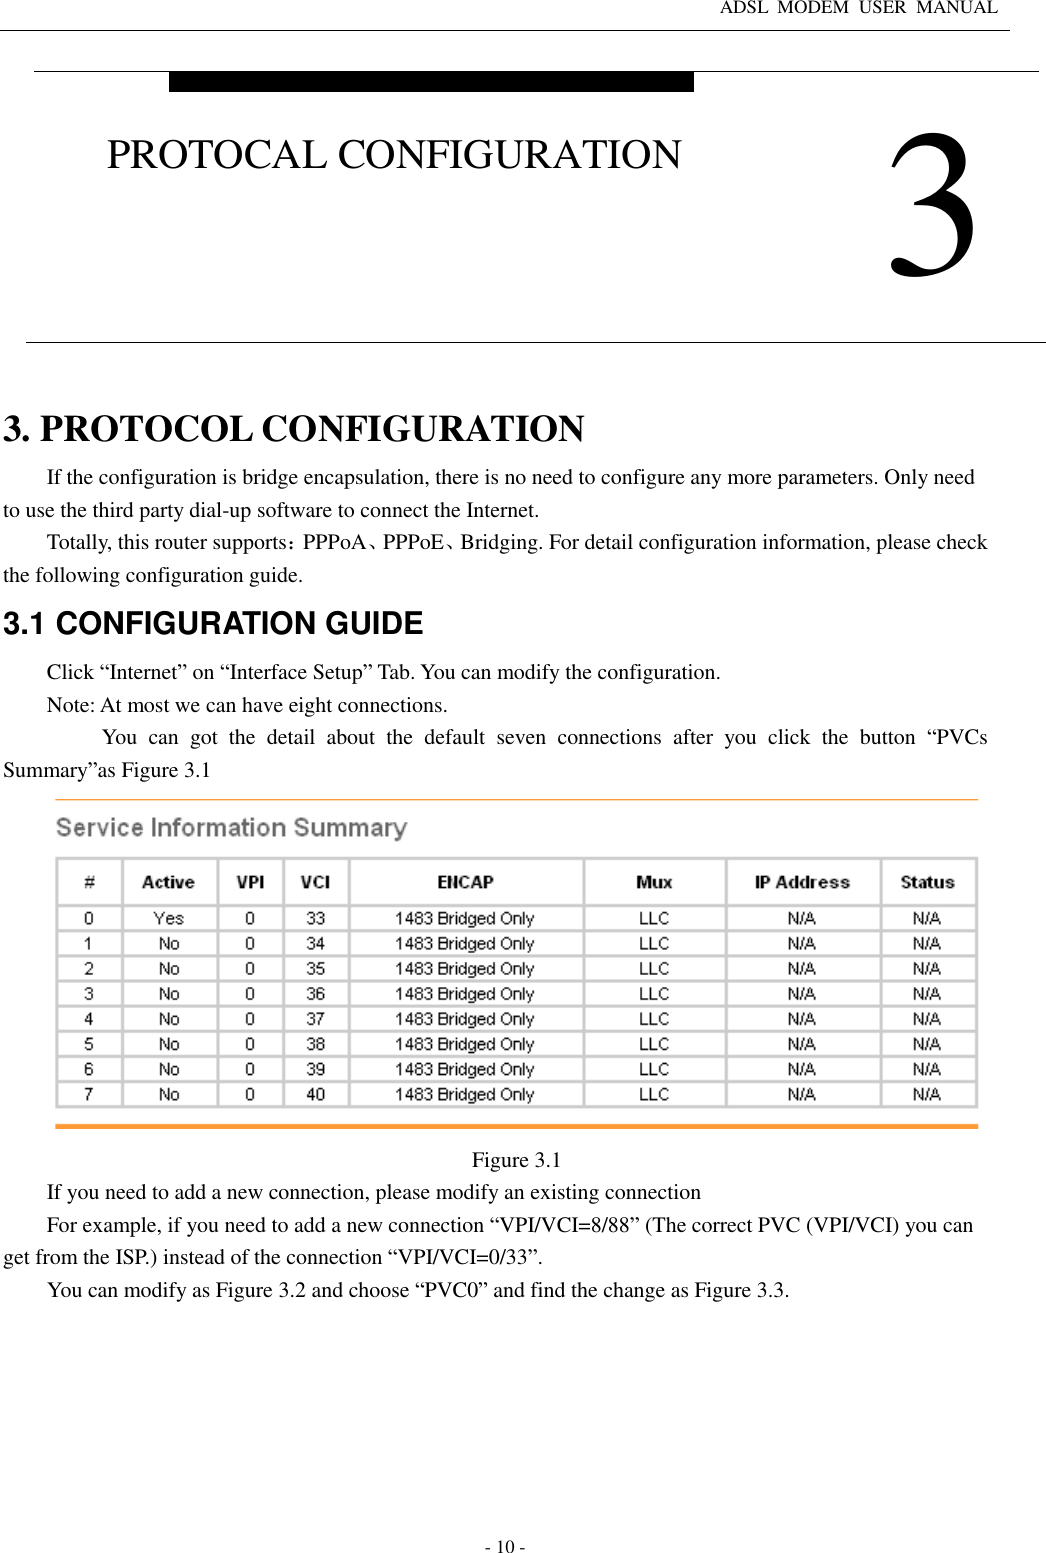 ADSL  MODEM  USER  MANUAL   - 10 - 3. PROTOCOL CONFIGURATION If the configuration is bridge encapsulation, there is no need to configure any more parameters. Only need to use the third party dial-up software to connect the Internet.   Totally, this router supports：PPPoA、PPPoE、Bridging. For detail configuration information, please check the following configuration guide. 3.1 CONFIGURATION GUIDE Click “Internet” on “Interface Setup” Tab. You can modify the configuration. Note: At most we can have eight connections.     You  can  got  the  detail  about  the  default  seven  connections  after  you  click  the  button  “PVCs Summary”as Figure 3.1  Figure 3.1 If you need to add a new connection, please modify an existing connection   For example, if you need to add a new connection “VPI/VCI=8/88” (The correct PVC (VPI/VCI) you can get from the ISP.) instead of the connection “VPI/VCI=0/33”. You can modify as Figure 3.2 and choose “PVC0” and find the change as Figure 3.3.  3 PROTOCAL CONFIGURATION 